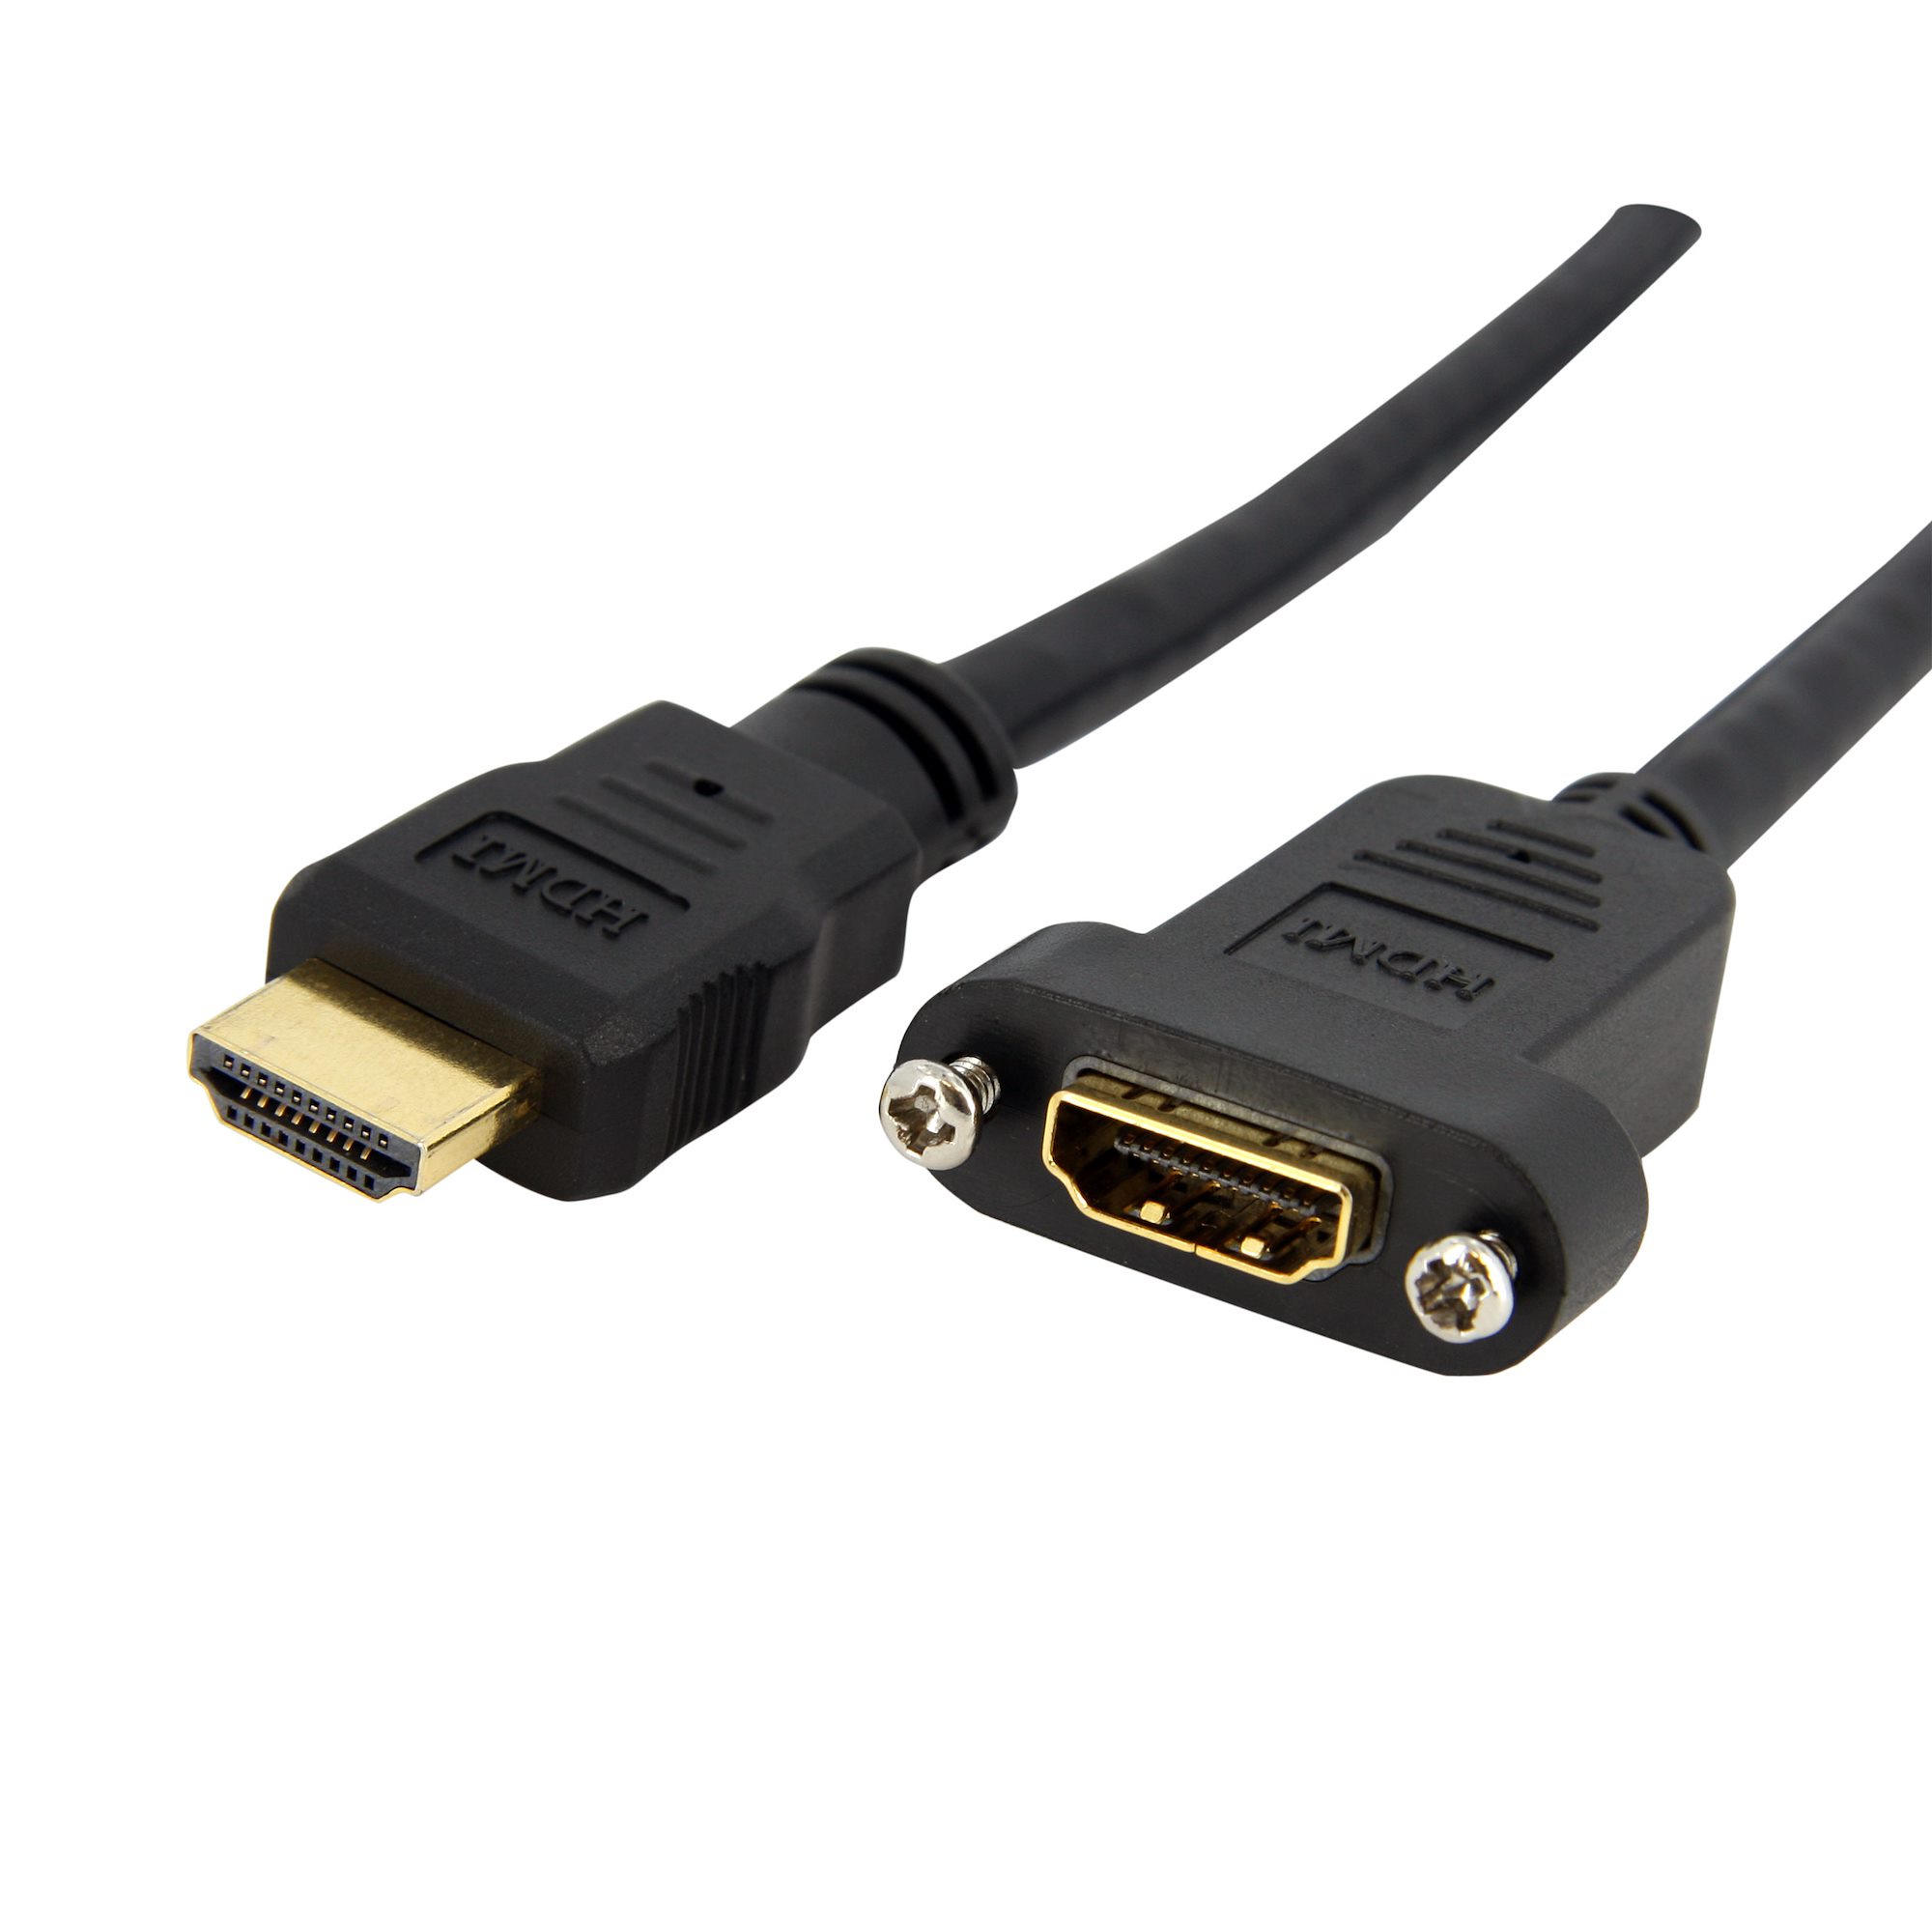 【HDMIPNLFM3】3 FT HIGH SPEED HDMI CABLE FOR P